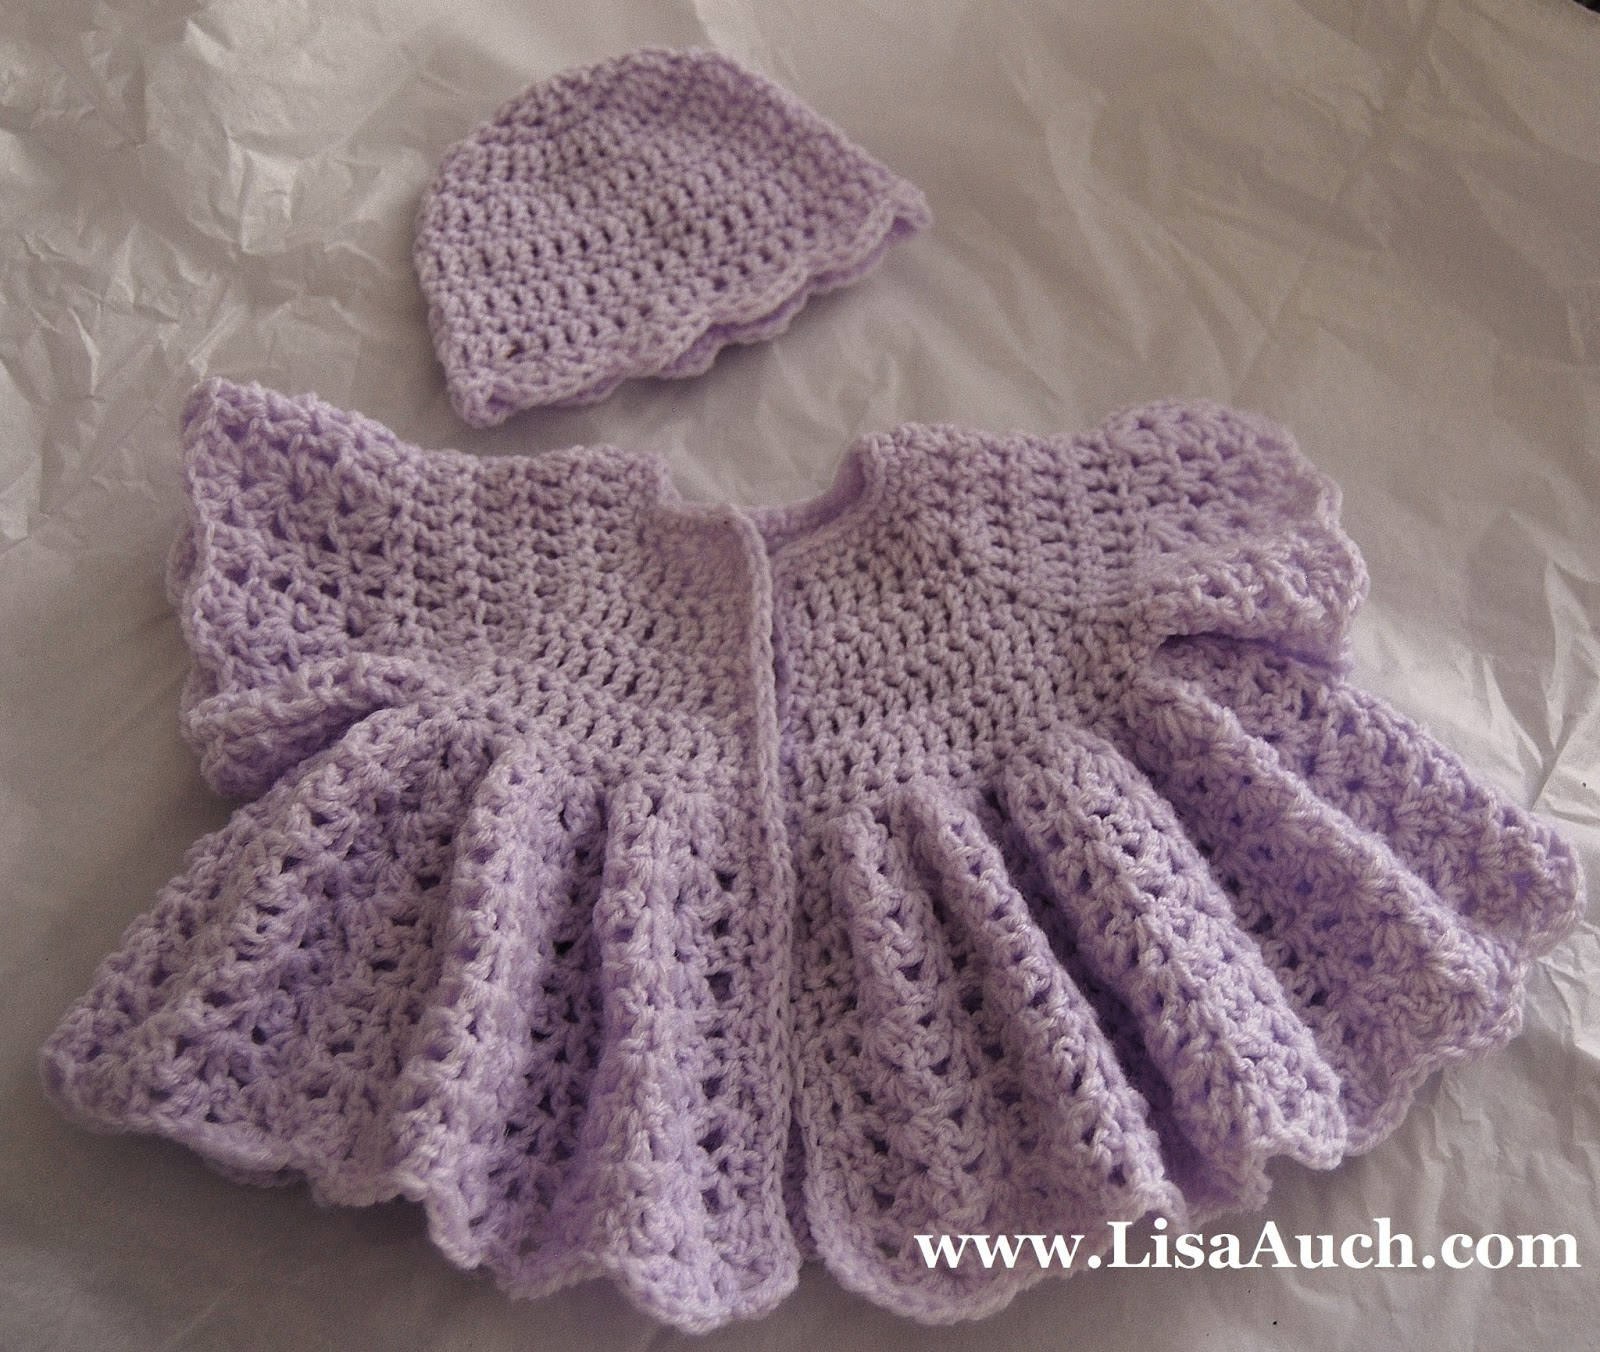 Free Crochet Baby Patterns Free Crochet Patterns And Designs Lisaauch Free Crochet Pattern